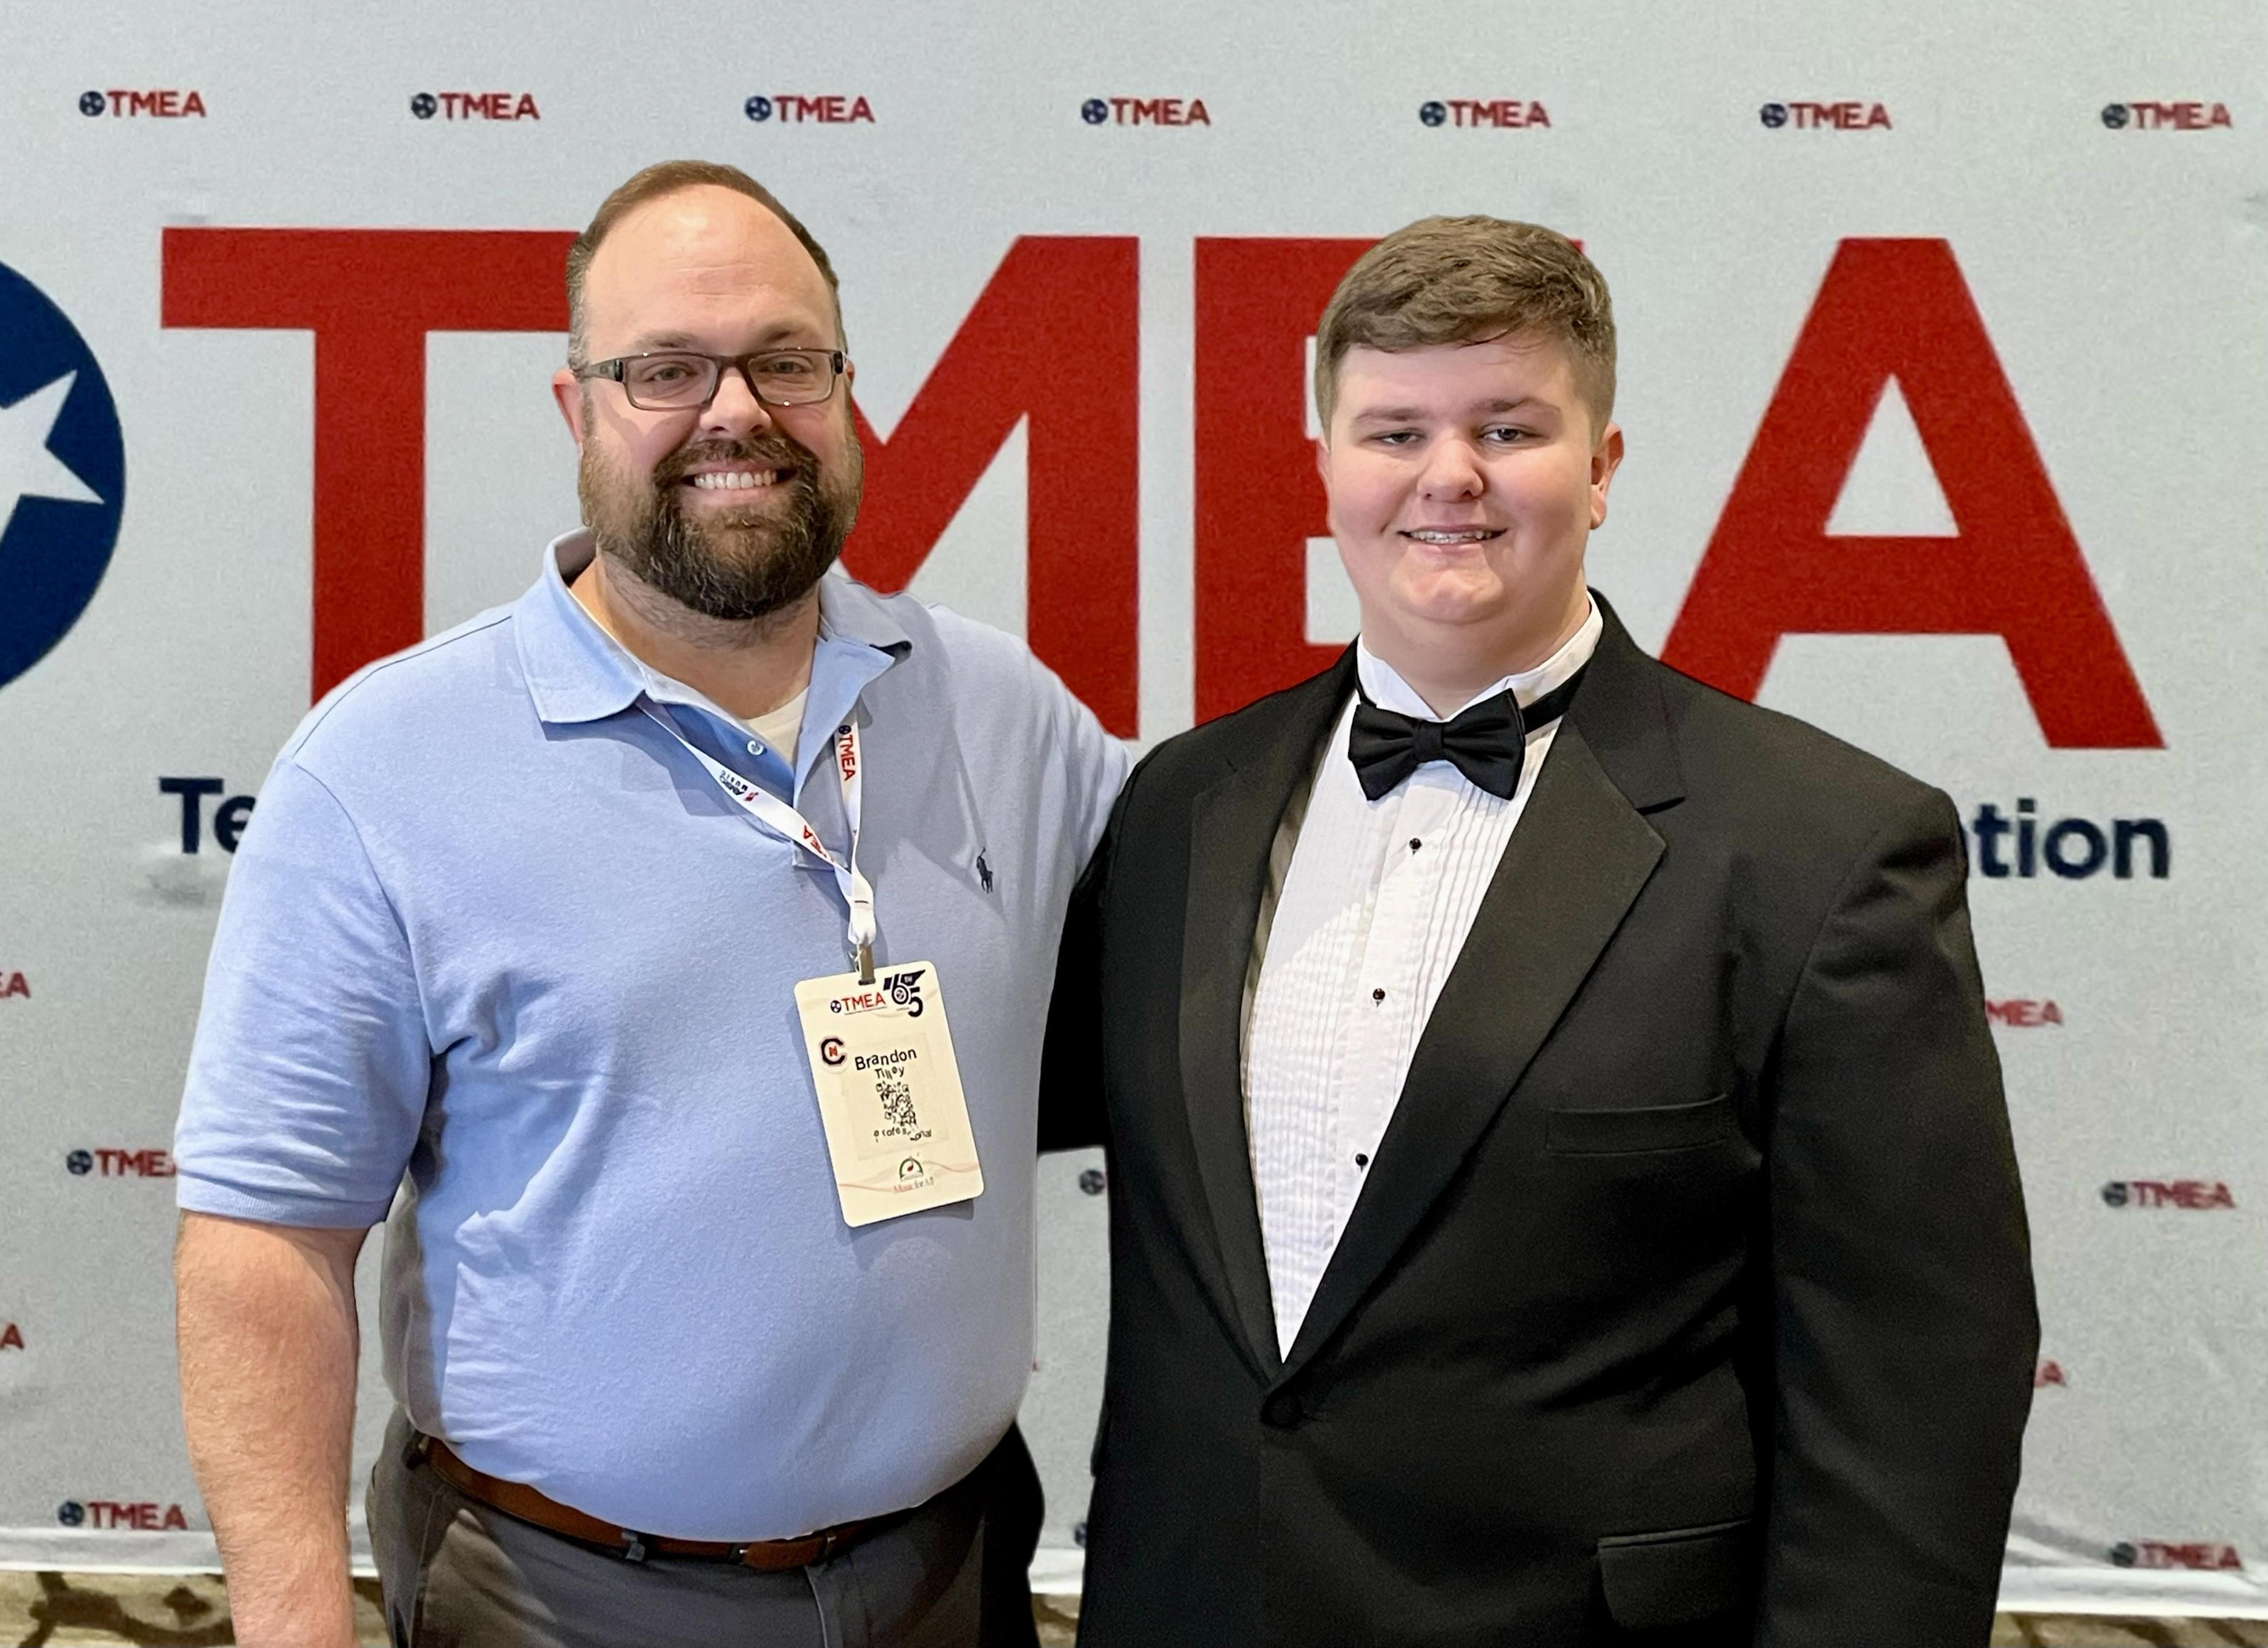 student and teacher in front of TMEA background